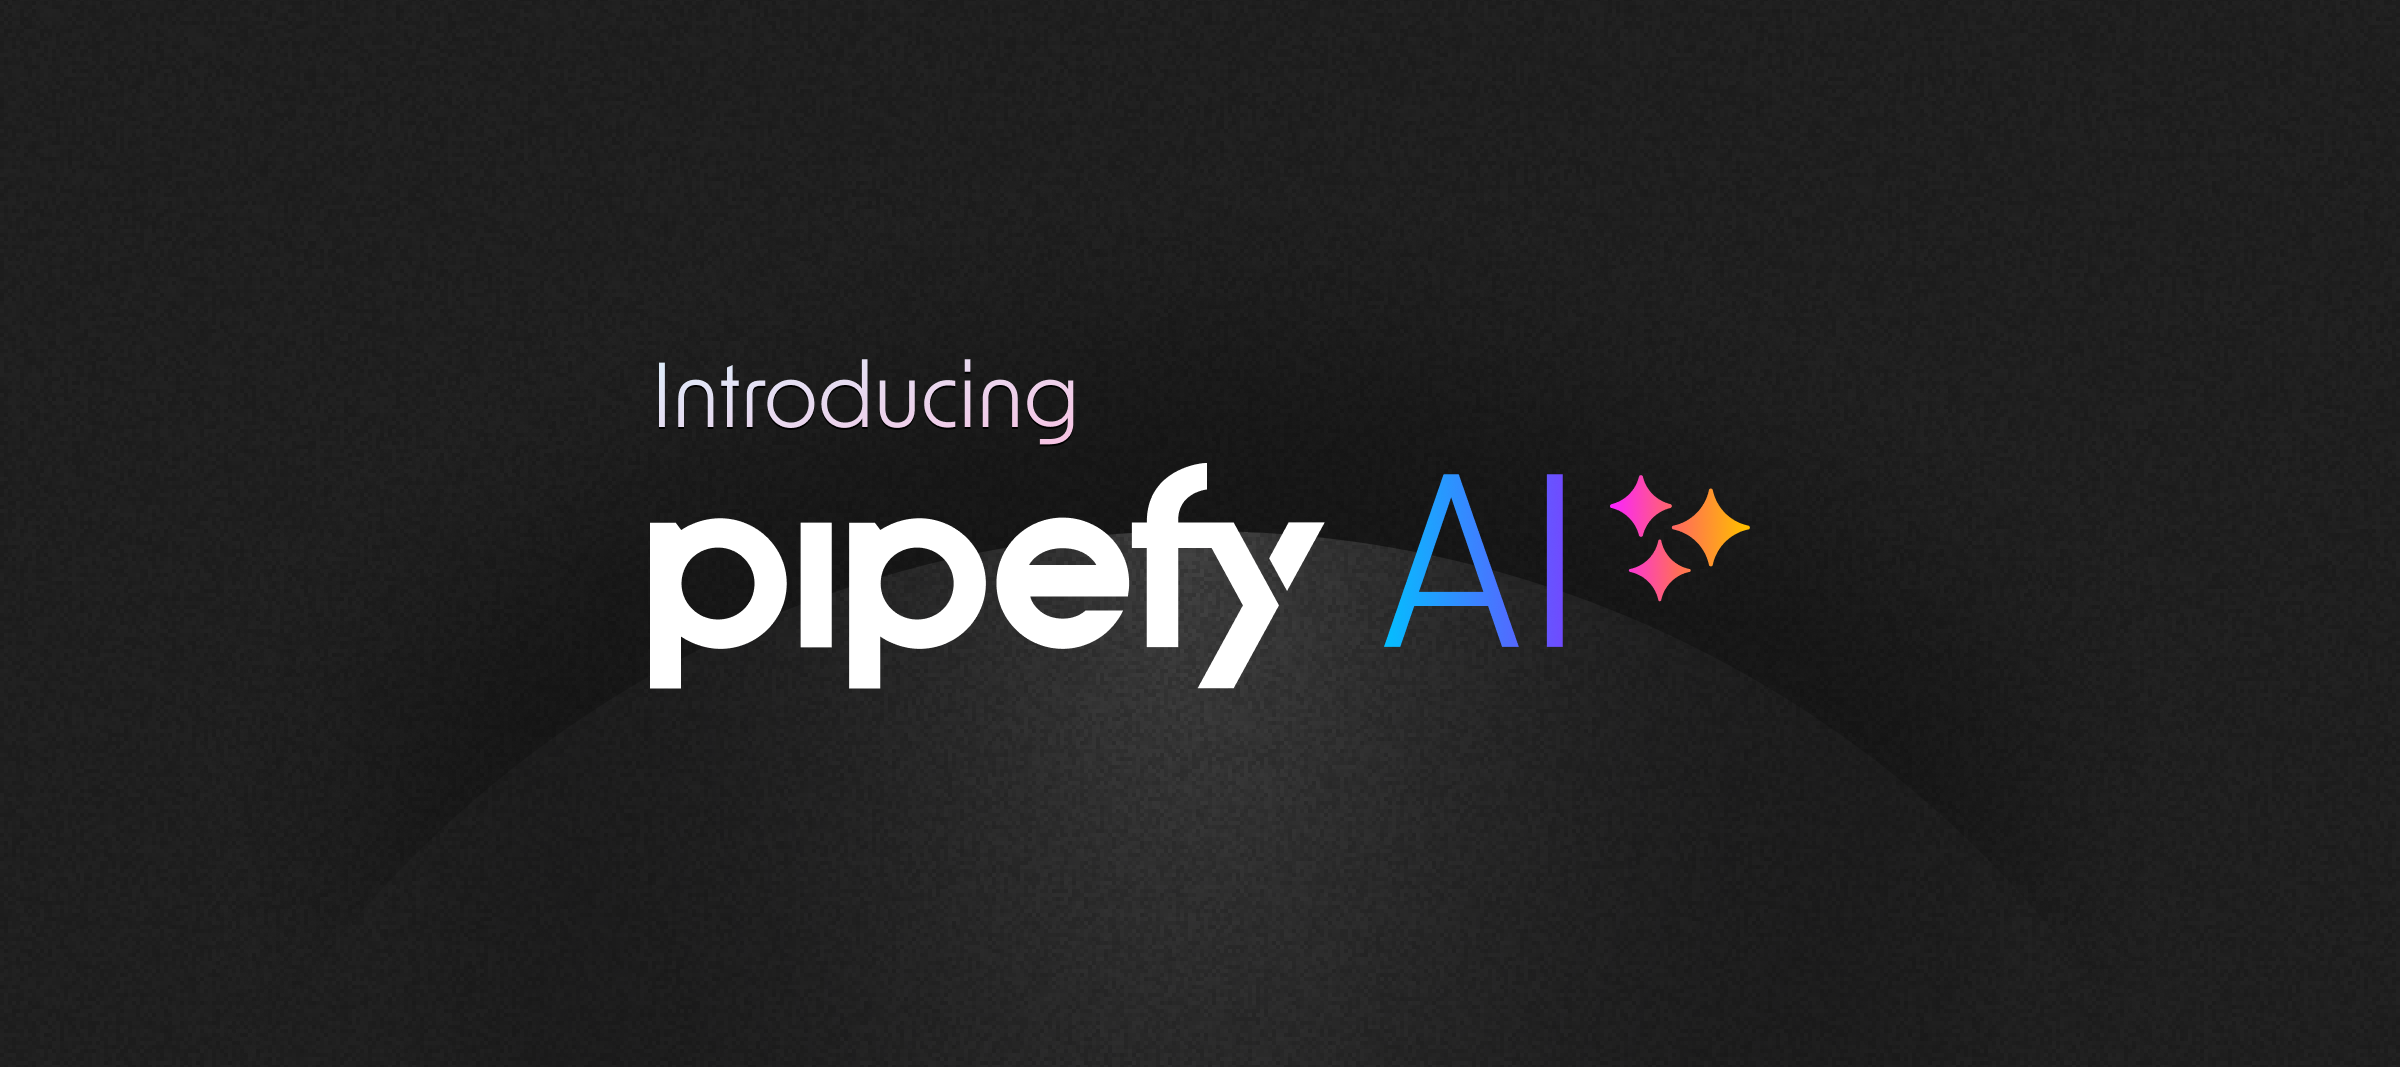 🤖 Meet Pipefy AI : The next frontier for process automation.